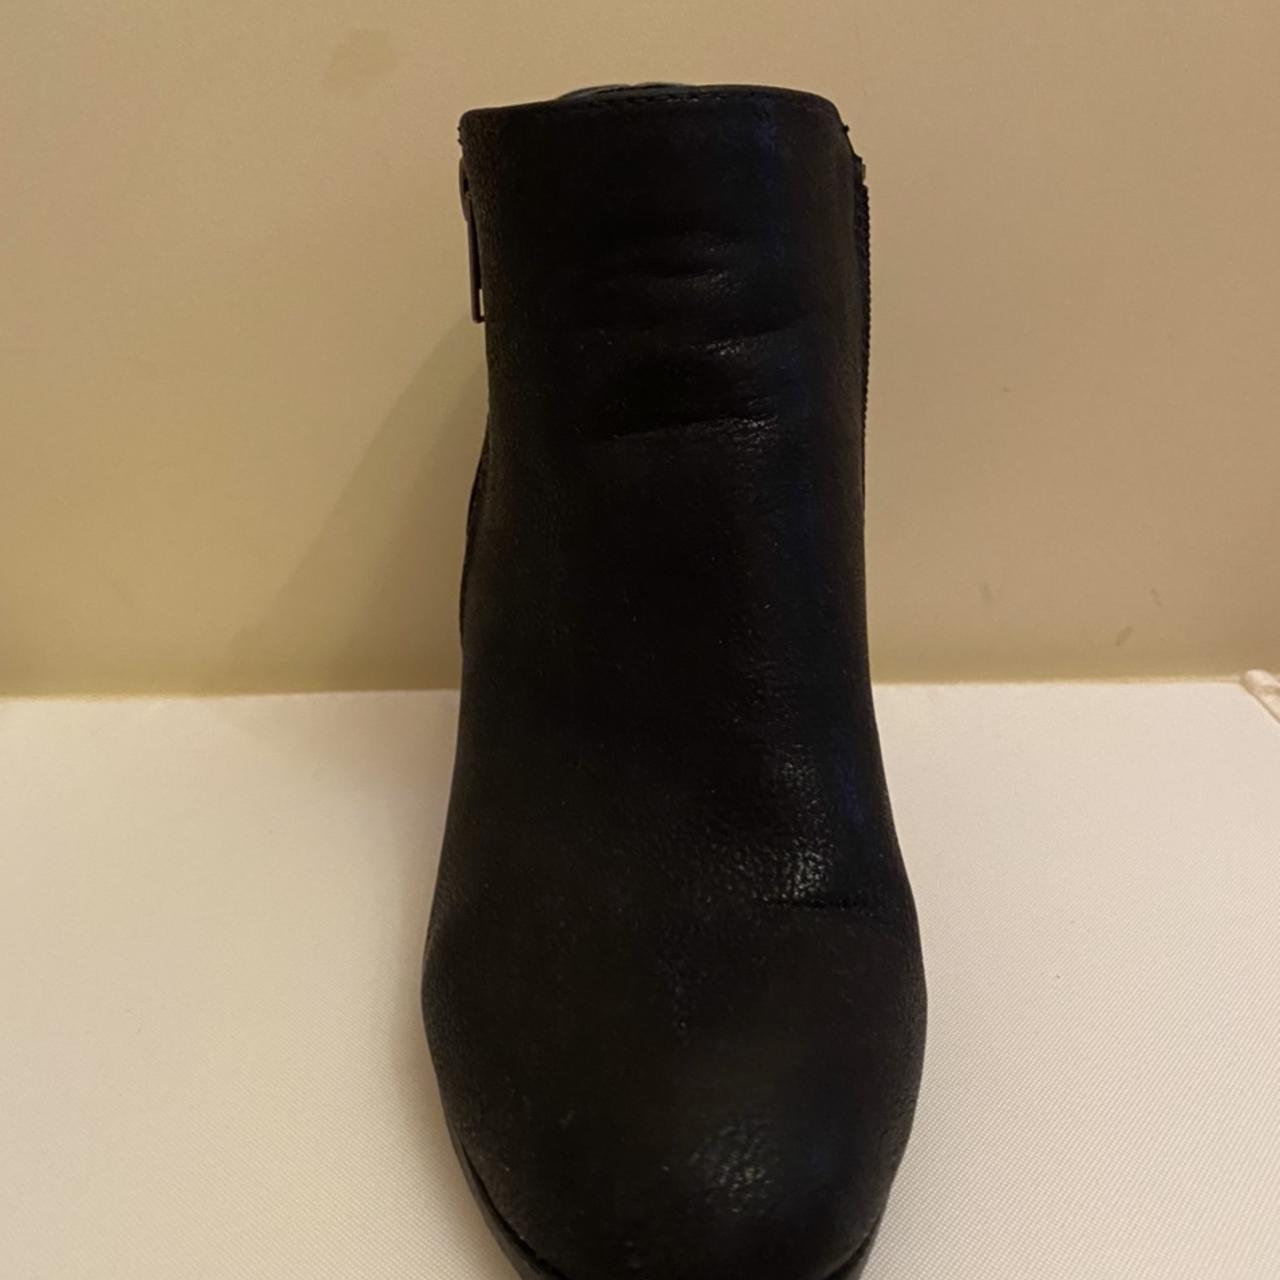 Wallis size 3 black ankle boots. In great condition.... - Depop